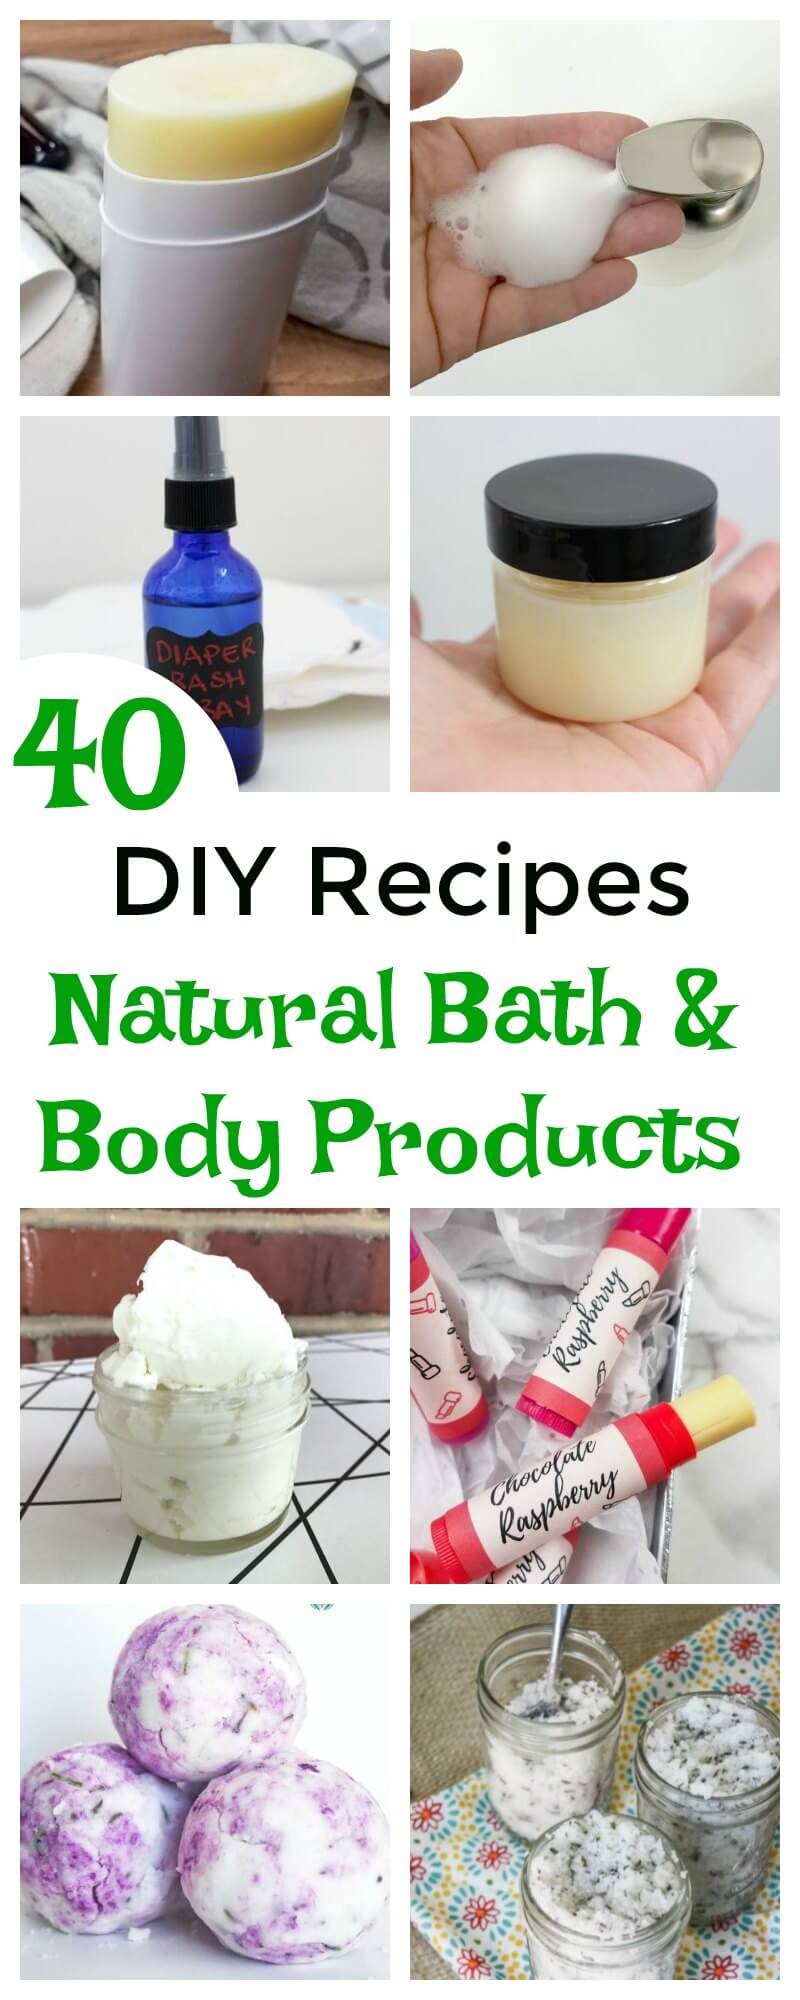 Did you know that most of us come in contact with more than 100 toxic chemicals every morning before we even leave our homes? Make your own DIY bath and body to avoid toxic chemicals and save money. Get this new ebook with 40 recipes for everyone in your family - DIY baby products to DIY self-care products.